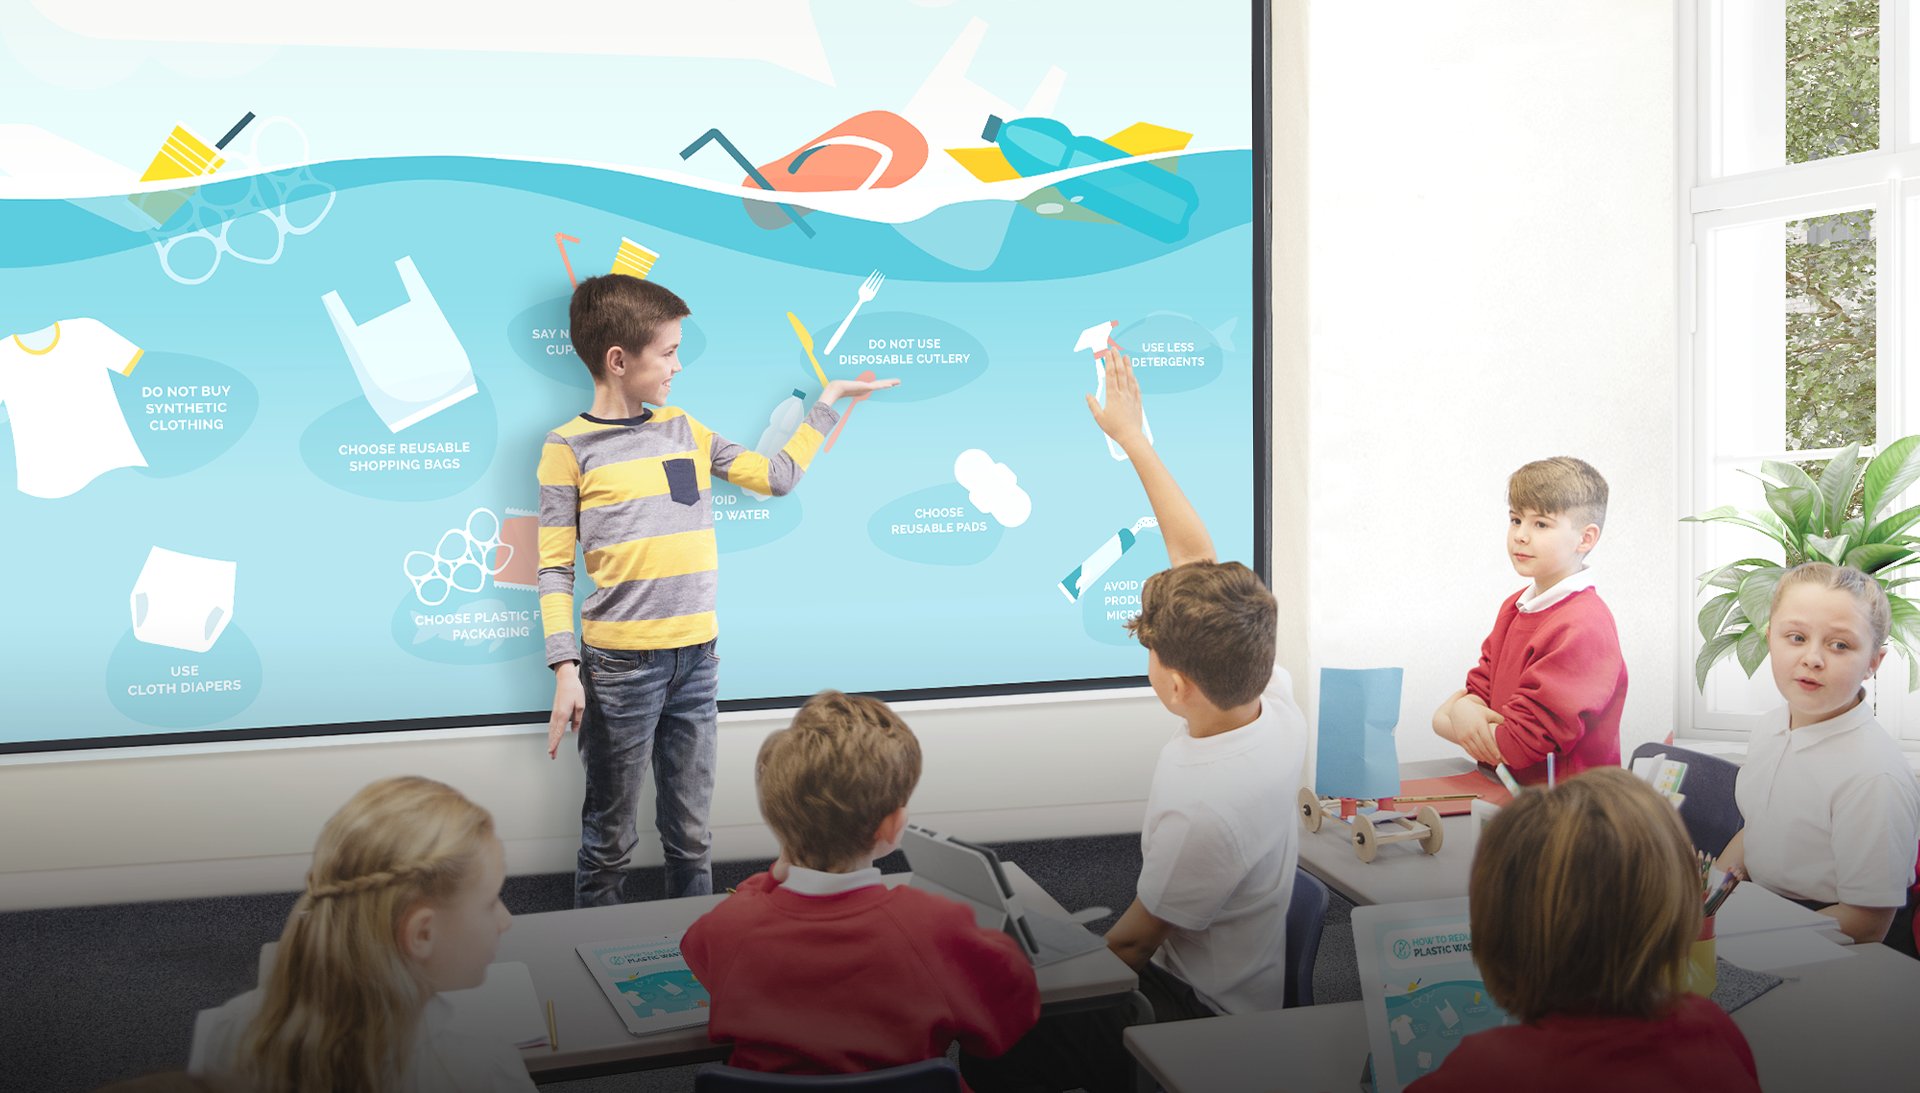 BenQ EW600 WXGA Wireless Smart Projector for Classroom provides the teachers with the best classroom tools and helps them make stronger connections with students and work their teaching magic every day.